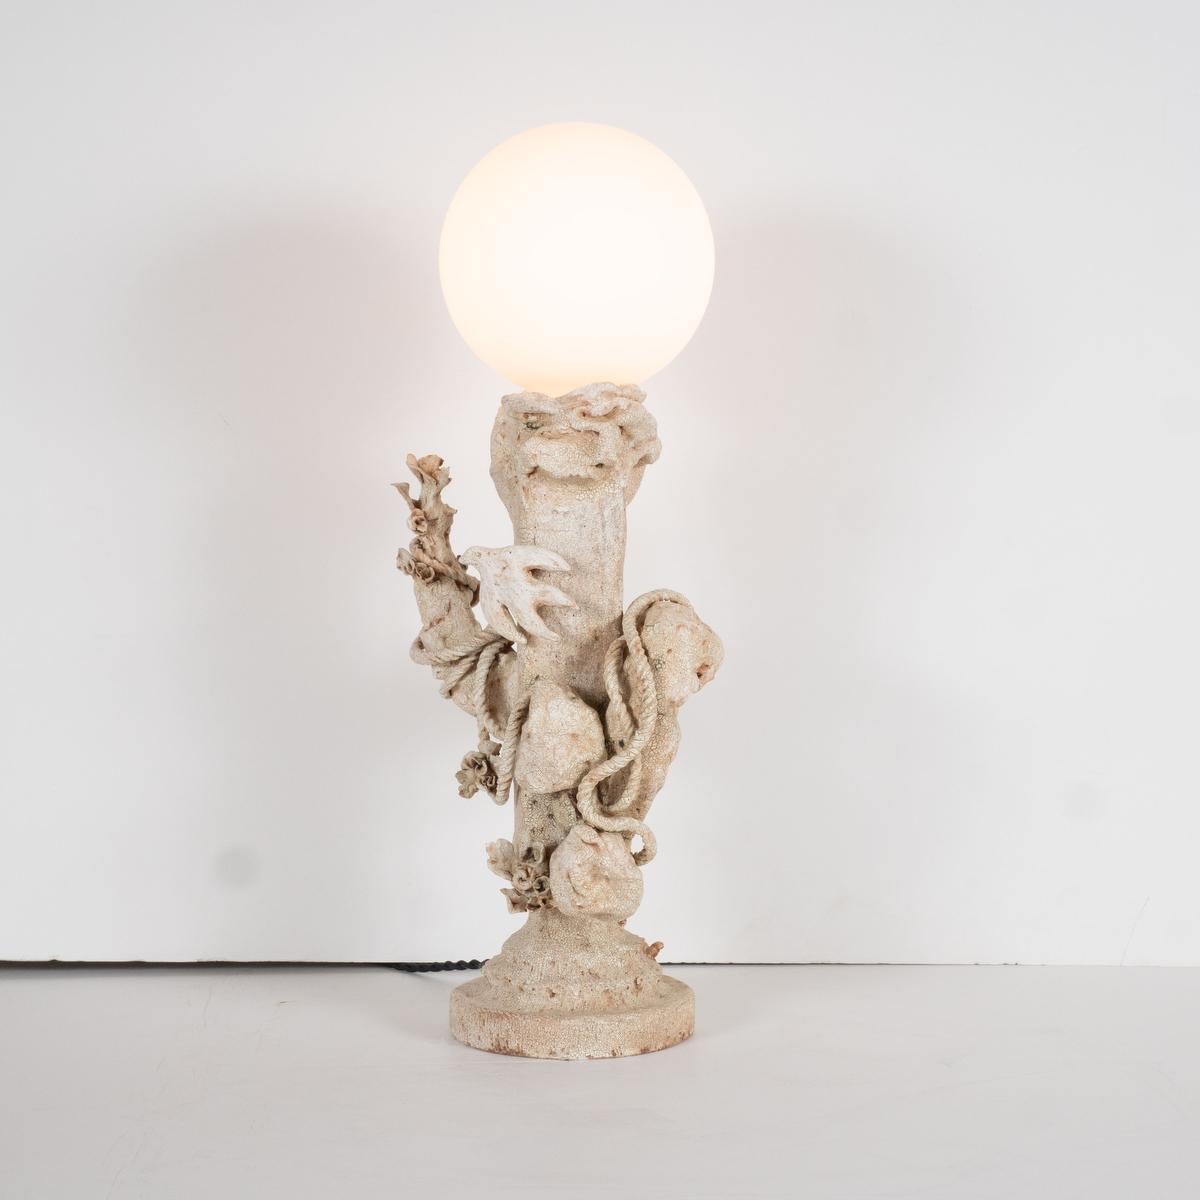 This one-of-a-kind, hand-built stoneware lamp is part of the Reef Series which references antiquated found objects, otherworldly aquatic flora, and an obsession with birds. Includes 6